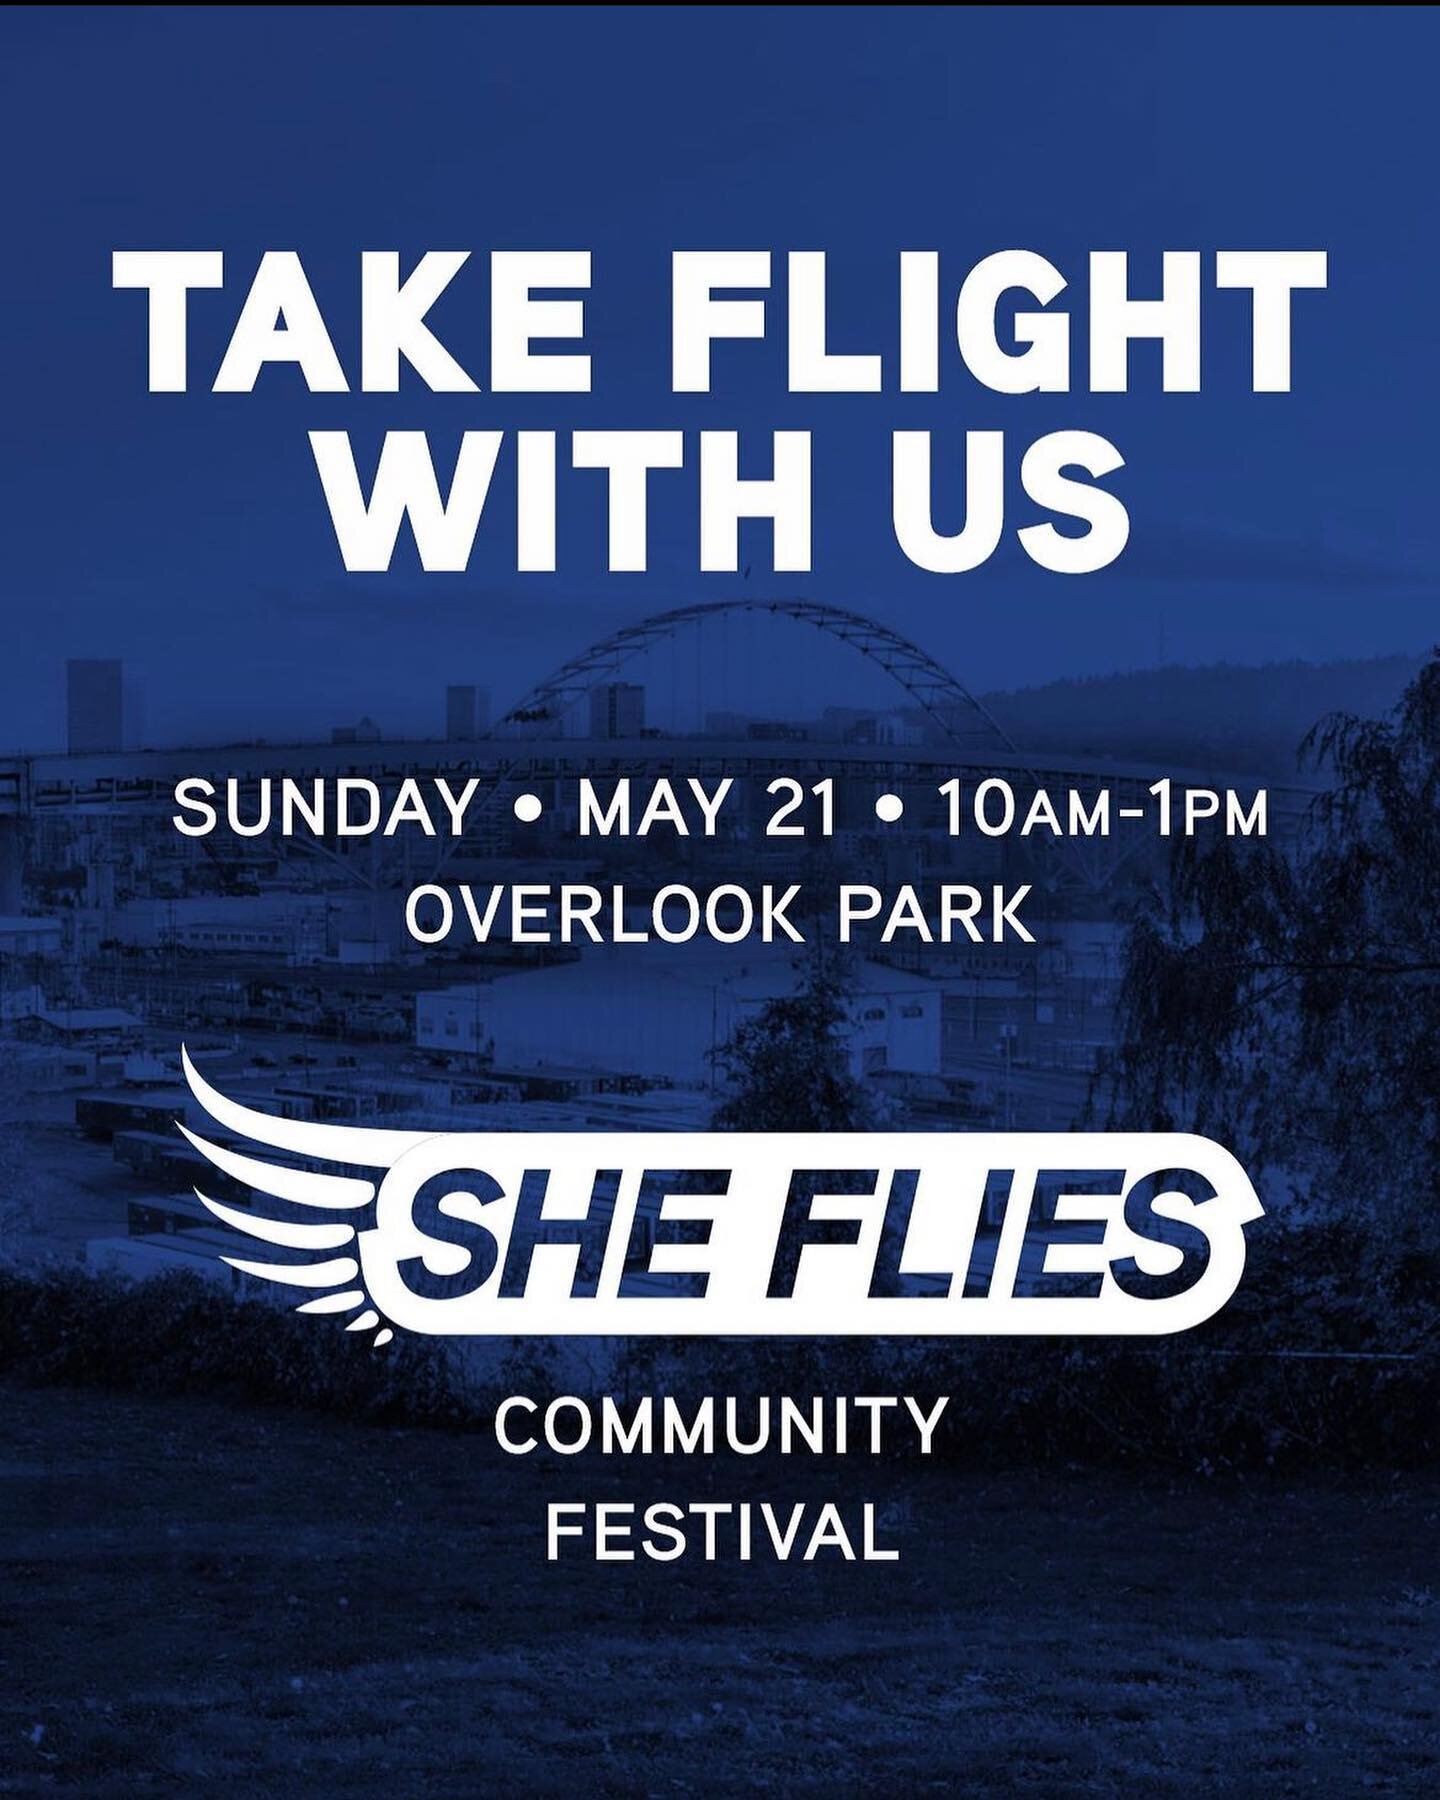 Come say hi to us at the She Flies Community Festival! 

Uplift girls and women through sport at the SHE FLIES Community Festival on Sunday, May 21, from 10 am to 1 pm at Overlook Park. This free, family-friendly event features live fitness activitie